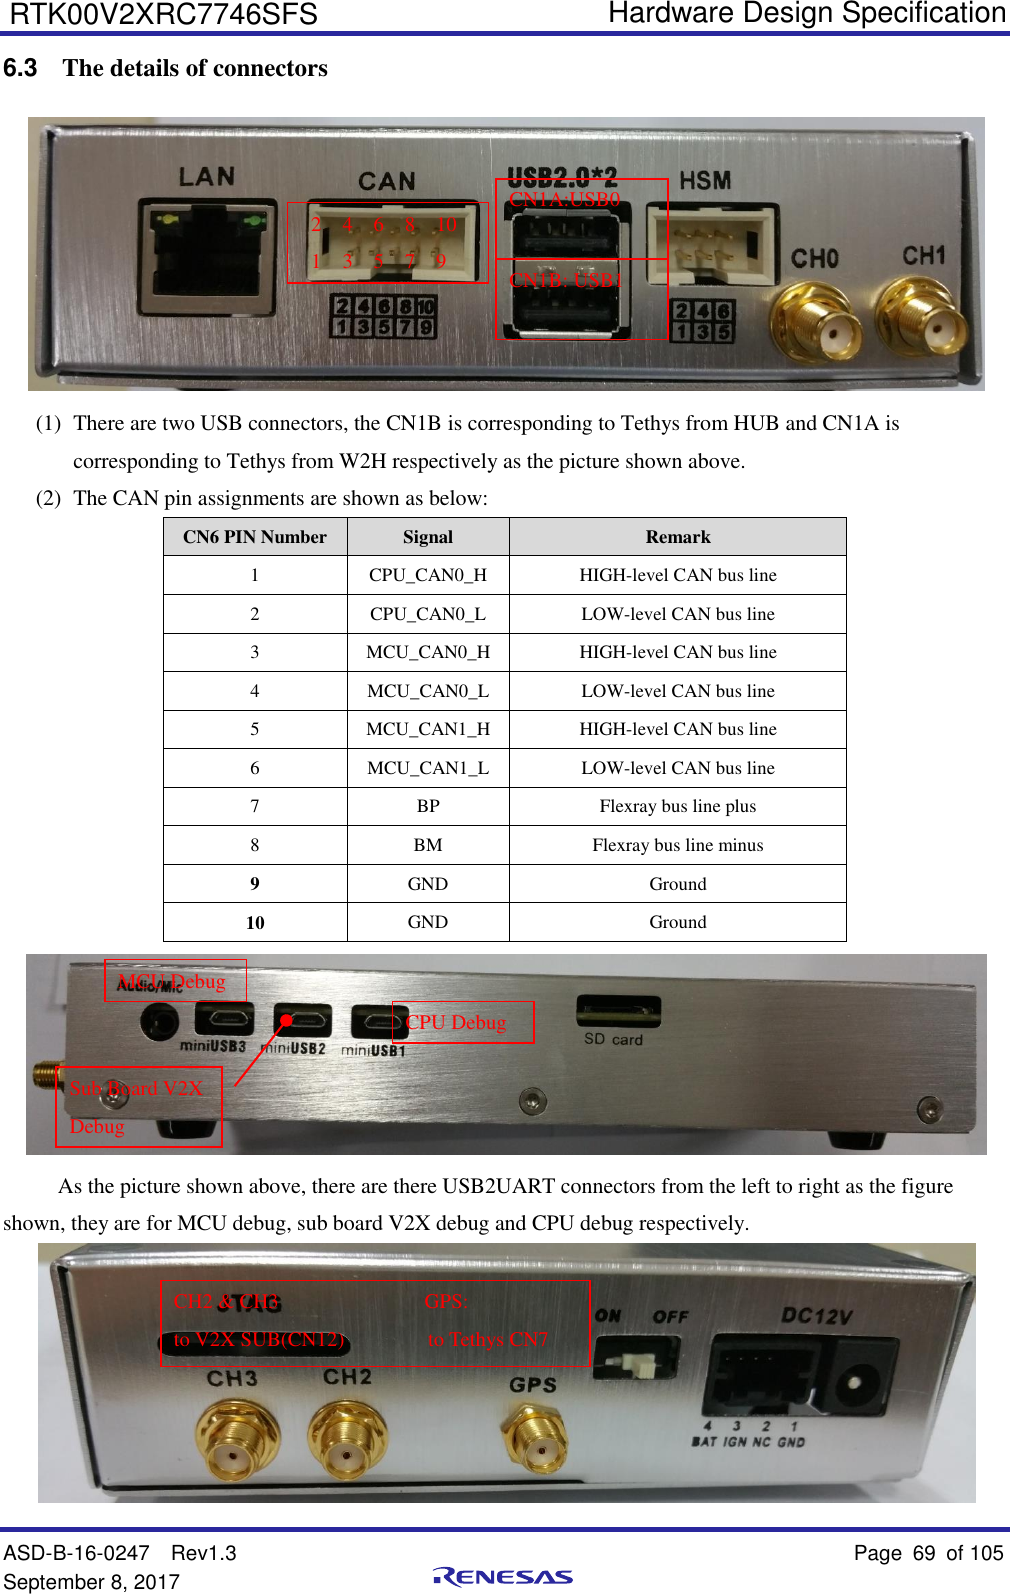   Hardware Design Specification ASD-B-16-0247  Rev1.3    Page 69  of 105 September 8, 2017      RTK00V2XRC7746SFS 6.3  The details of connectors    (1) There are two USB connectors, the CN1B is corresponding to Tethys from HUB and CN1A is corresponding to Tethys from W2H respectively as the picture shown above.   (2) The CAN pin assignments are shown as below: CN6 PIN Number Signal Remark 1 CPU_CAN0_H HIGH-level CAN bus line 2 CPU_CAN0_L LOW-level CAN bus line 3 MCU_CAN0_H HIGH-level CAN bus line 4 MCU_CAN0_L LOW-level CAN bus line 5 MCU_CAN1_H HIGH-level CAN bus line 6 MCU_CAN1_L LOW-level CAN bus line 7 BP Flexray bus line plus   8 BM Flexray bus line minus 9 GND Ground 10 GND Ground  As the picture shown above, there are there USB2UART connectors from the left to right as the figure shown, they are for MCU debug, sub board V2X debug and CPU debug respectively.  MCU Debug CPU Debug Sub Board V2X Debug   CH2 &amp; CH3                            GPS:       to V2X SUB(CN12)        to Tethys CN7 2  4  6  8  10 1  3  5  7  9 CN1B: USB1 CN1A:USB0 